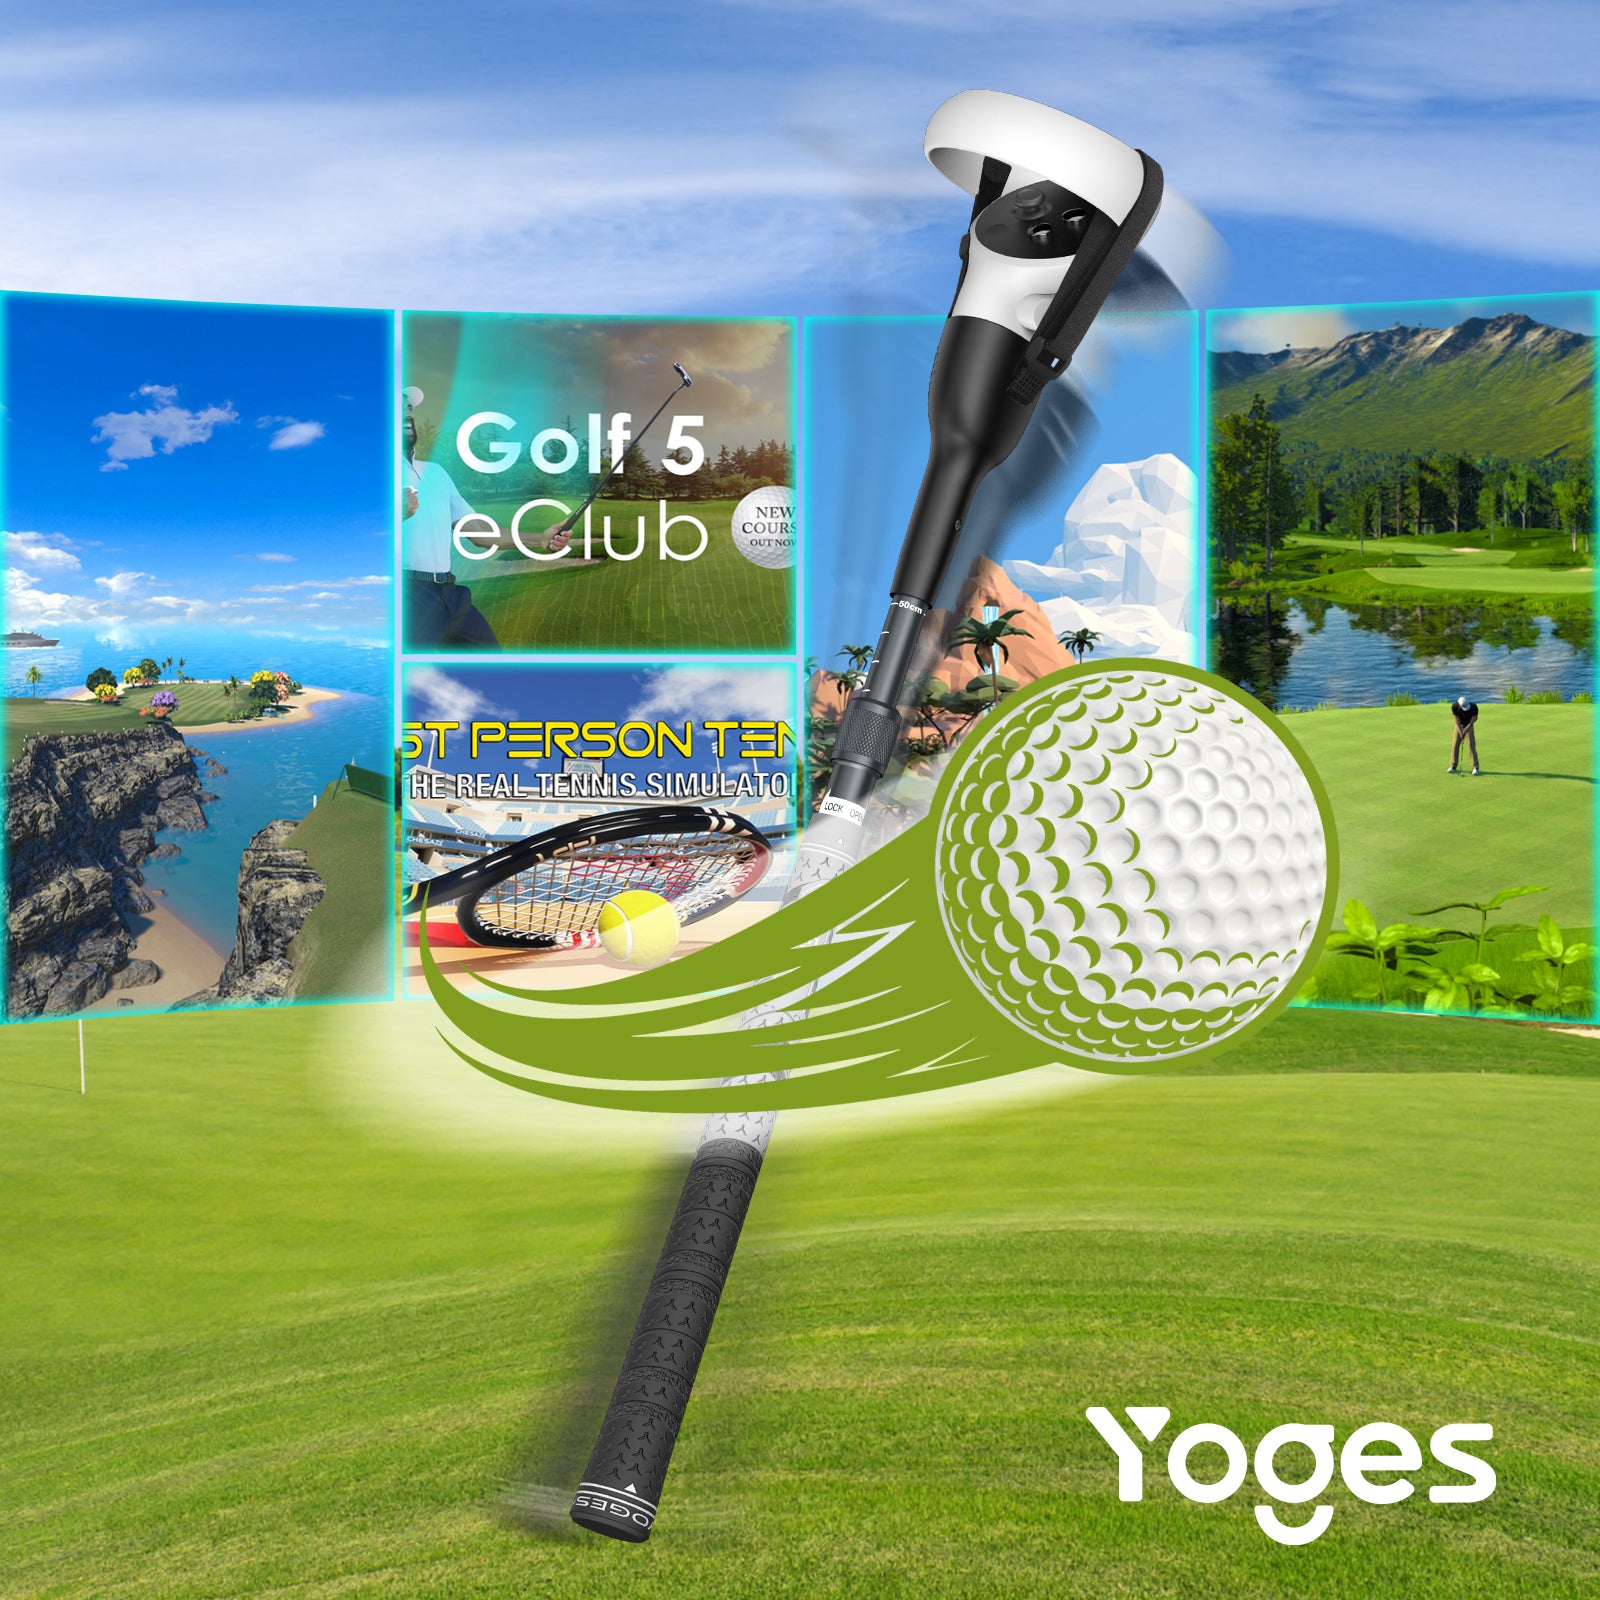 Golf VR Game Handle Compatible with Oculus Quest 2 Controller, YOGES Q6 Adjustable Length Grip for Golf +, Golf 5 eClub